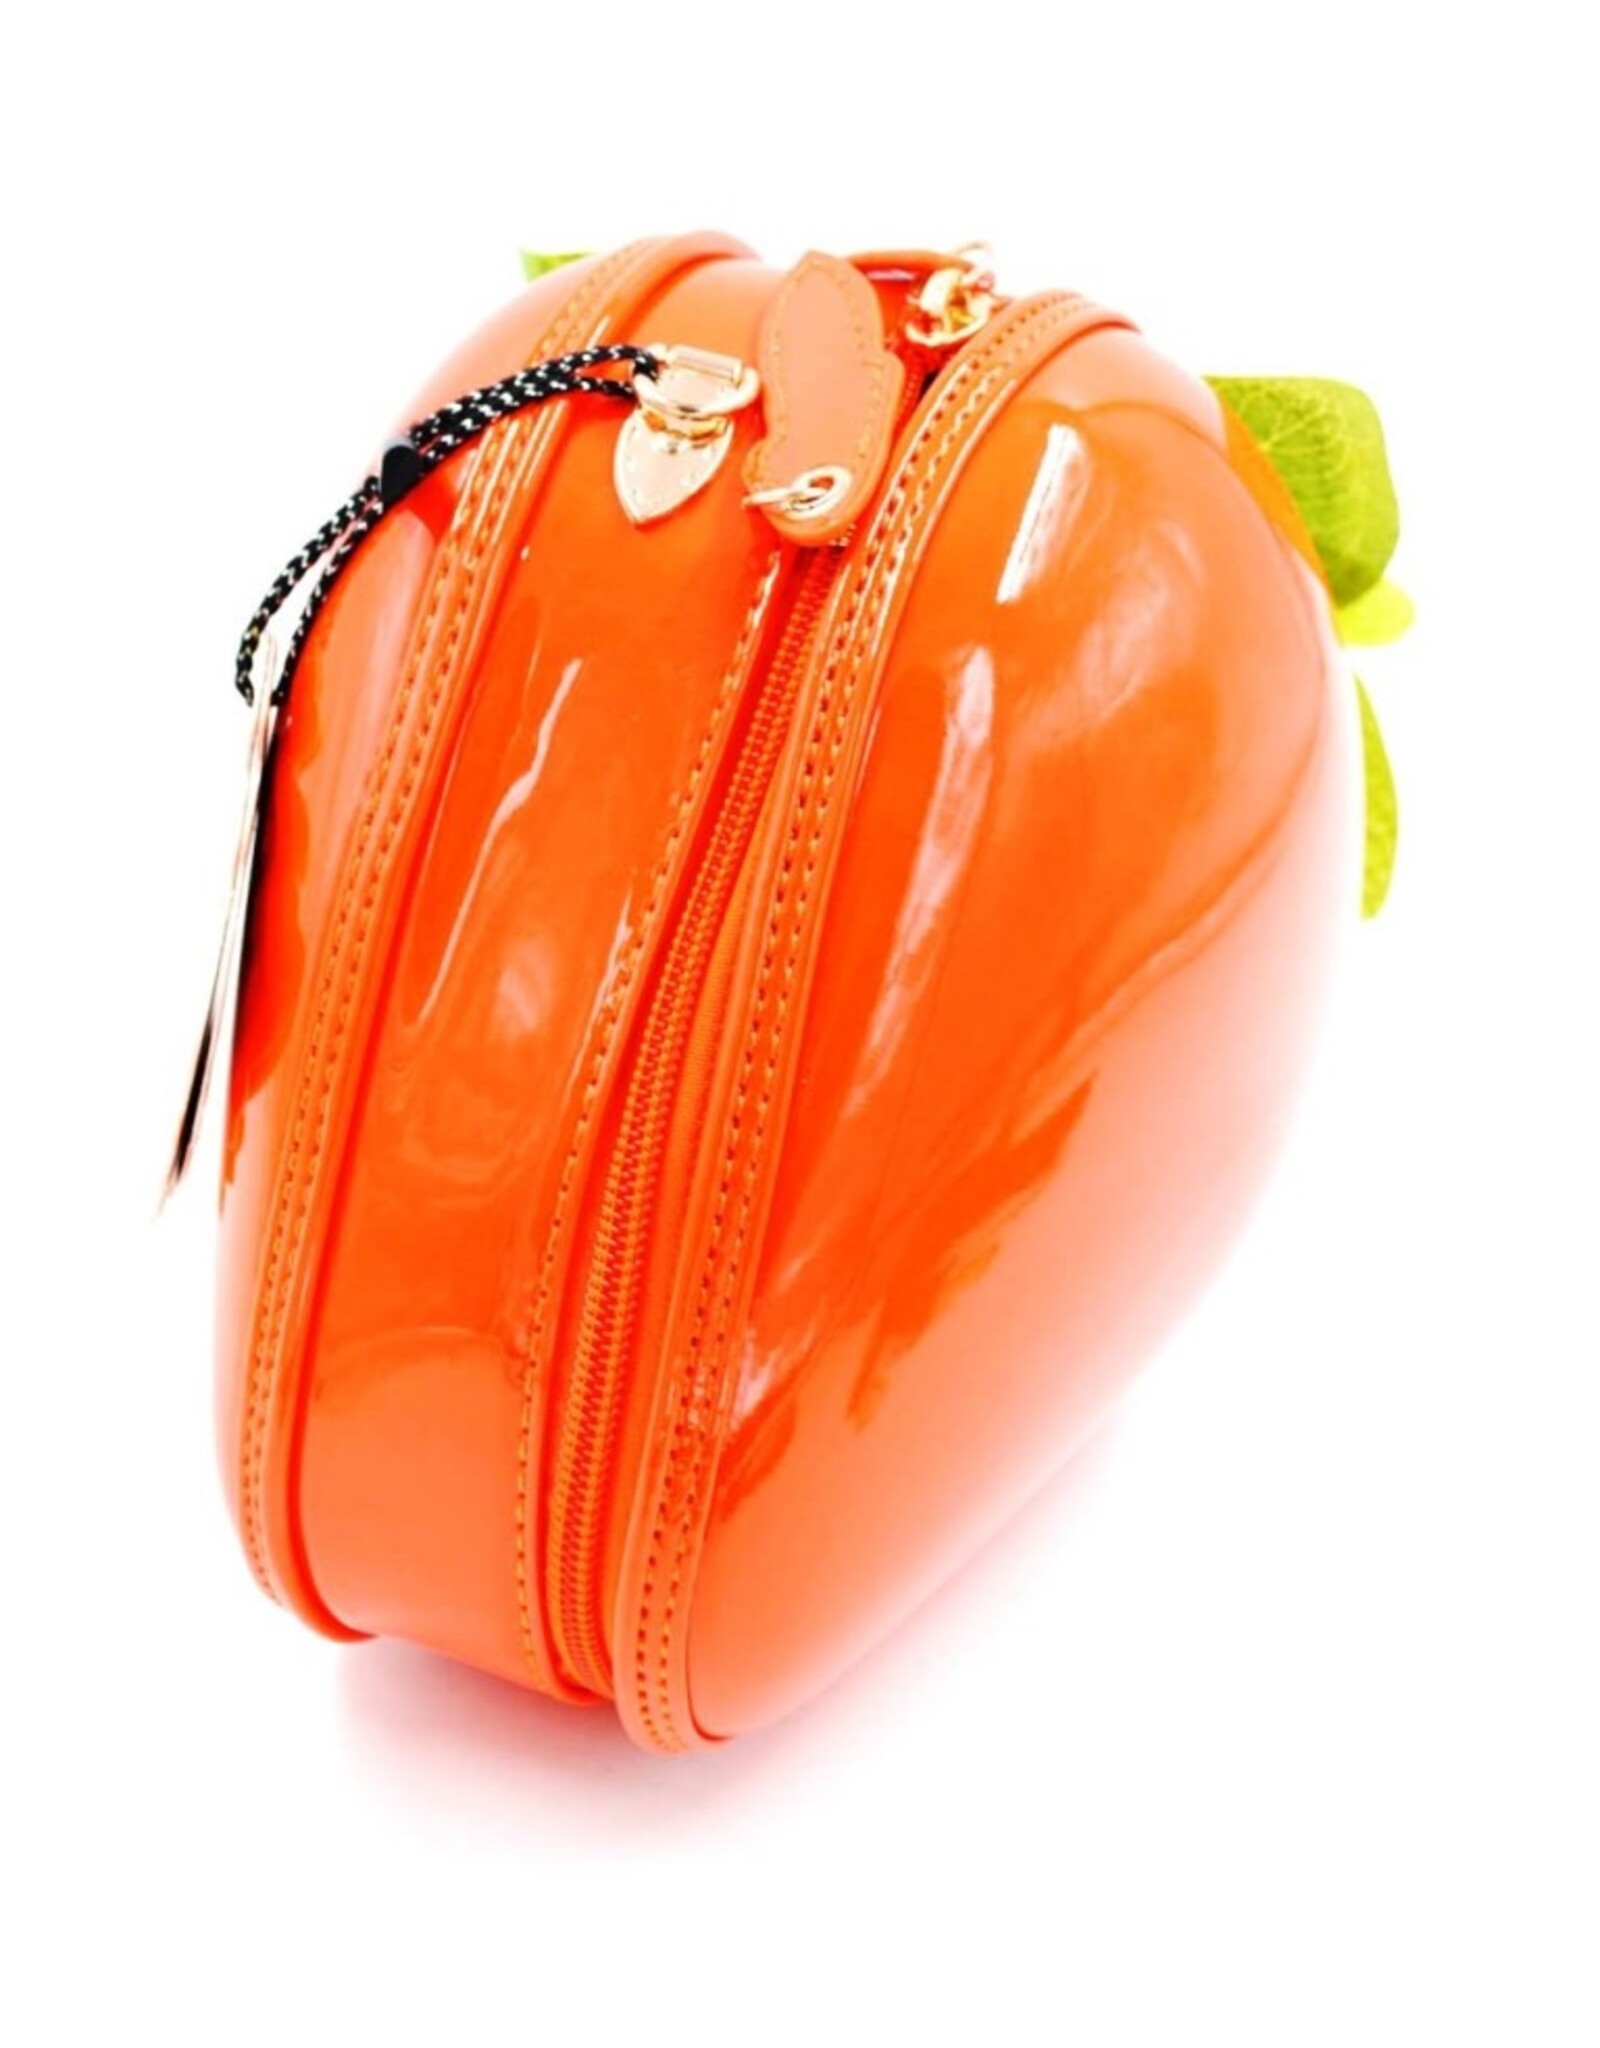 Systyle Fantasy bags and wallets - Fantasy bag Orange berry